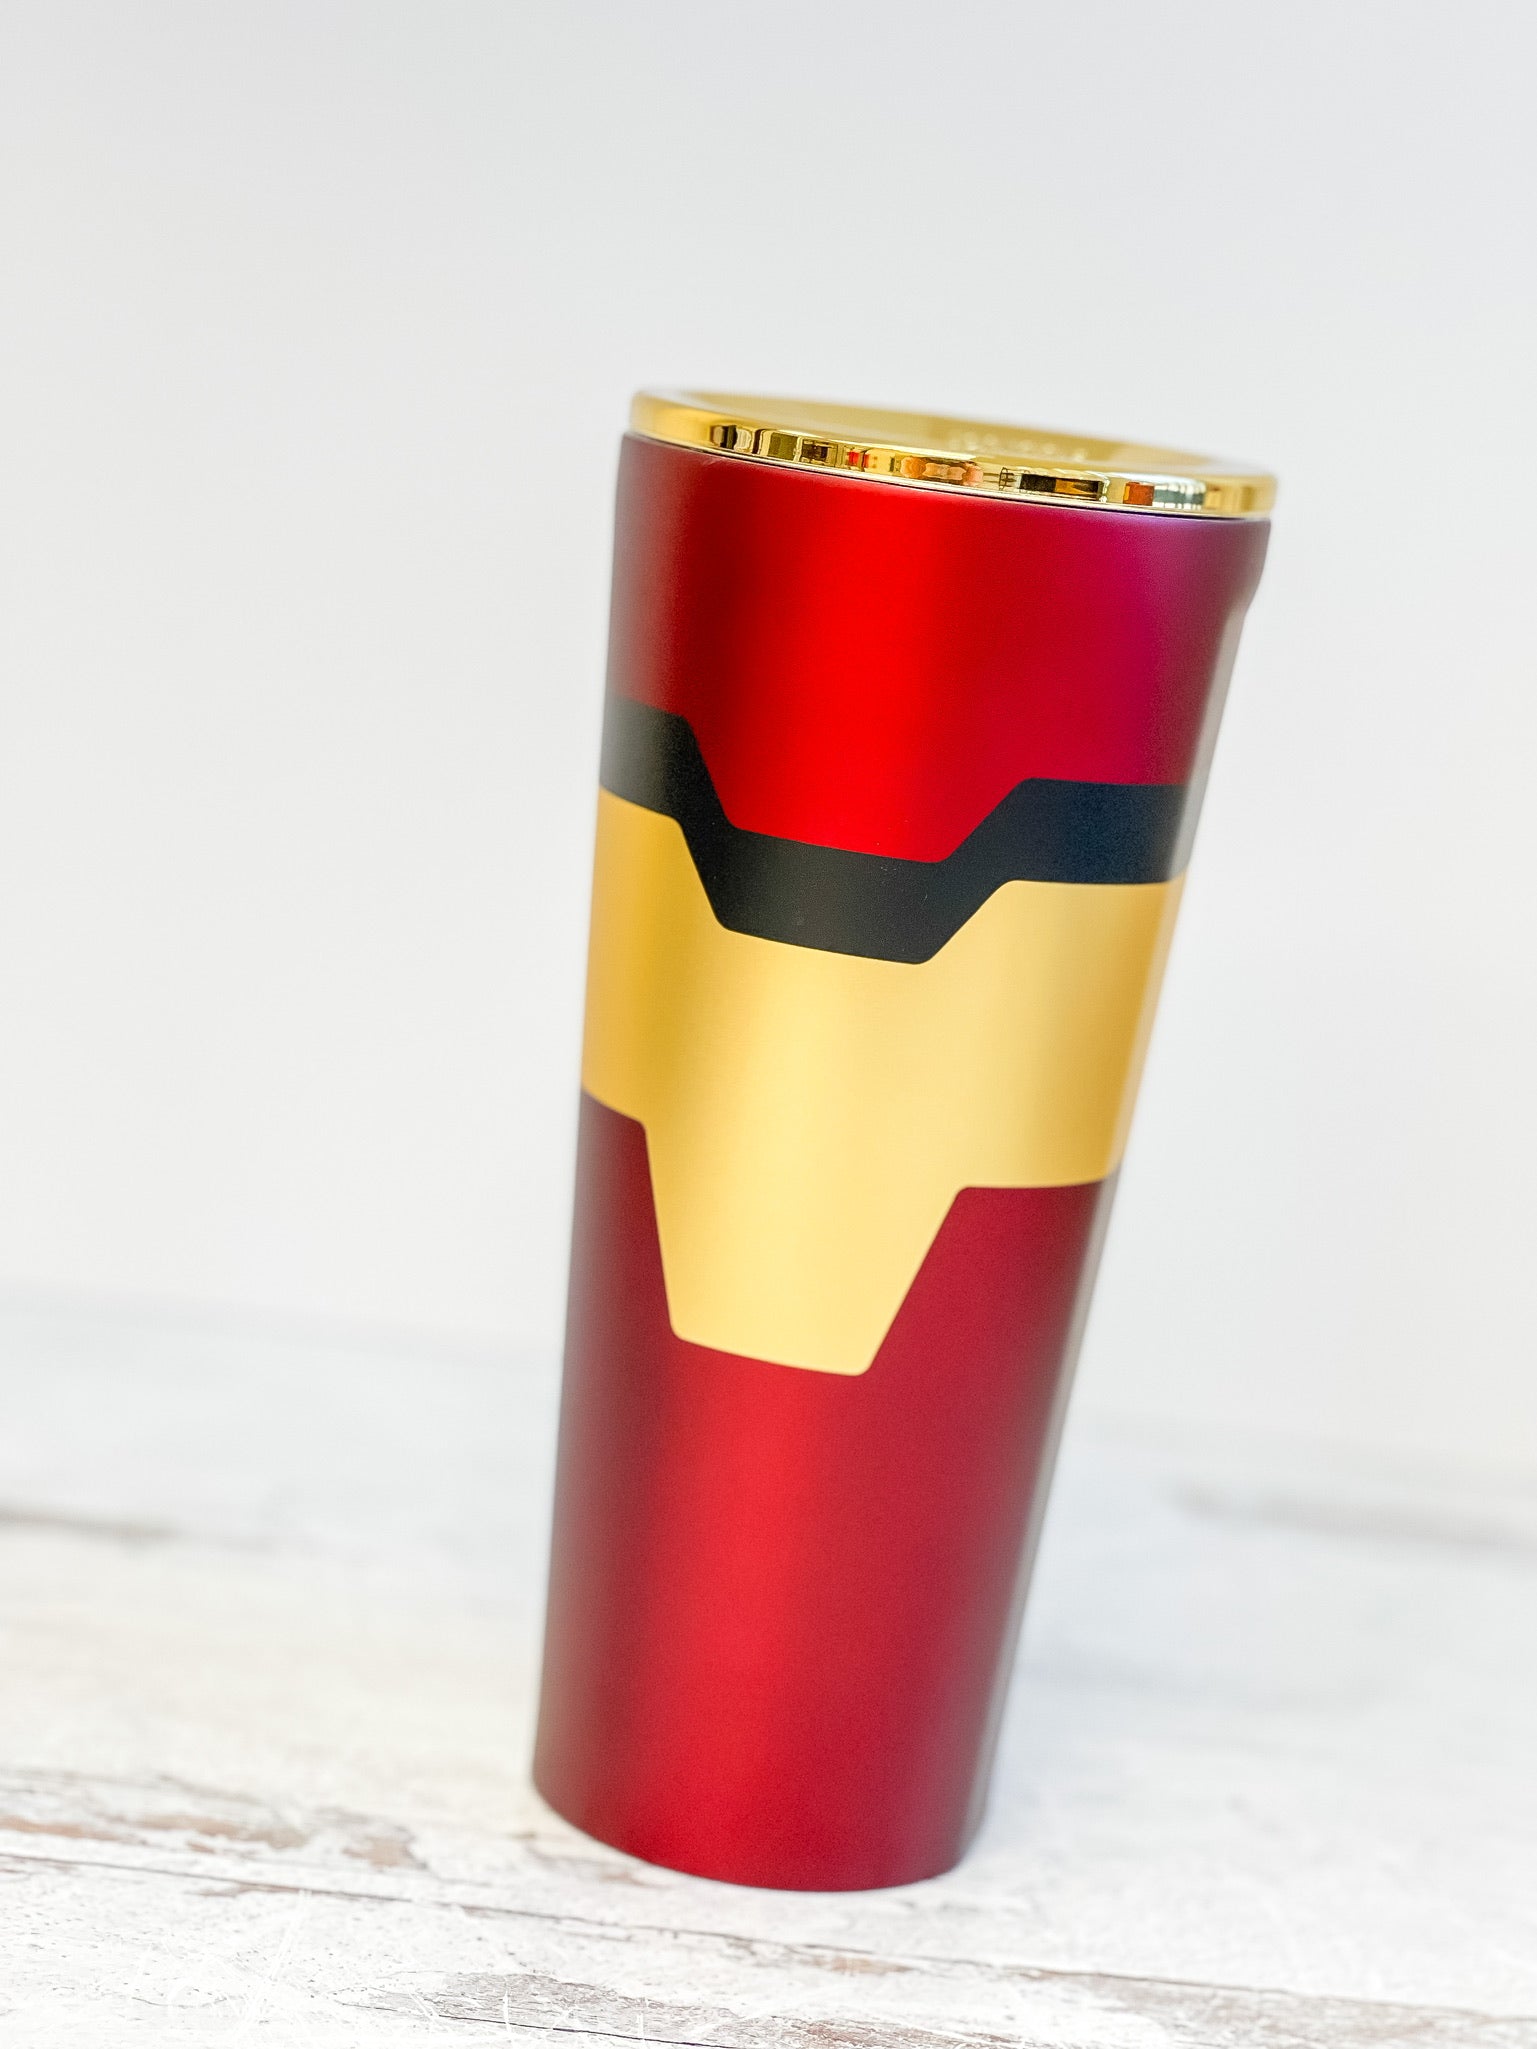 24 oz Stainless Steel Marvel Iron Man Tumbler by Corkcicle